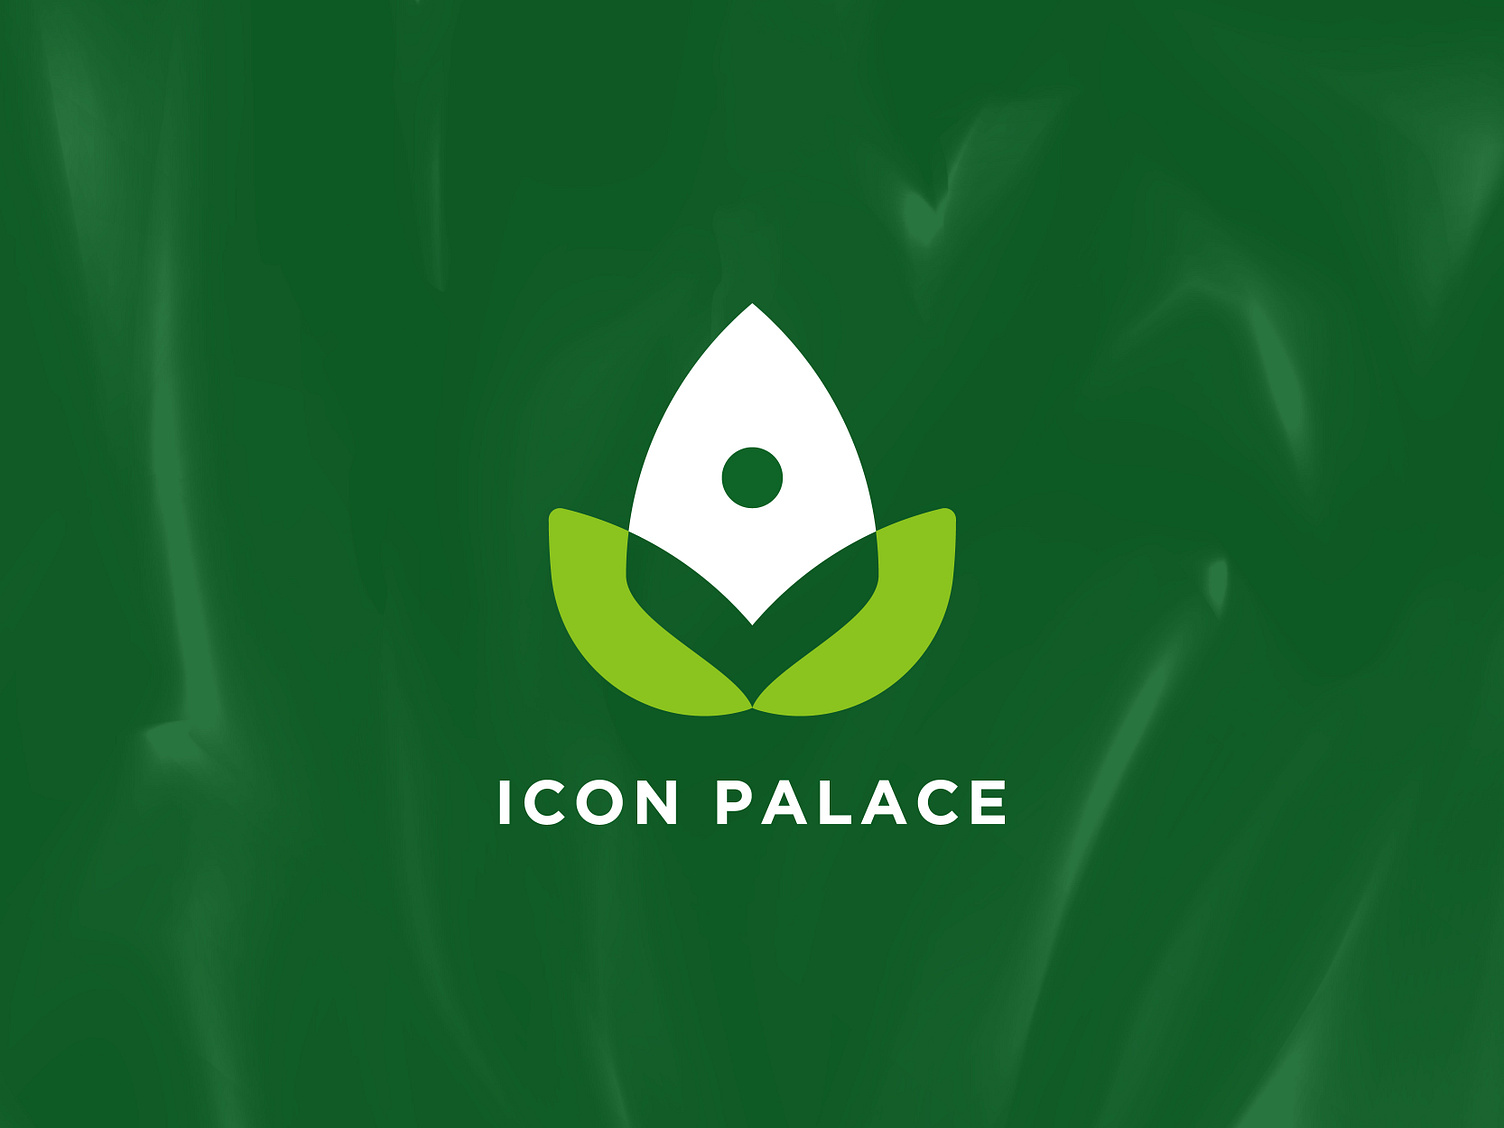 Icon Palace Logo by MD Abdul Alim on Dribbble